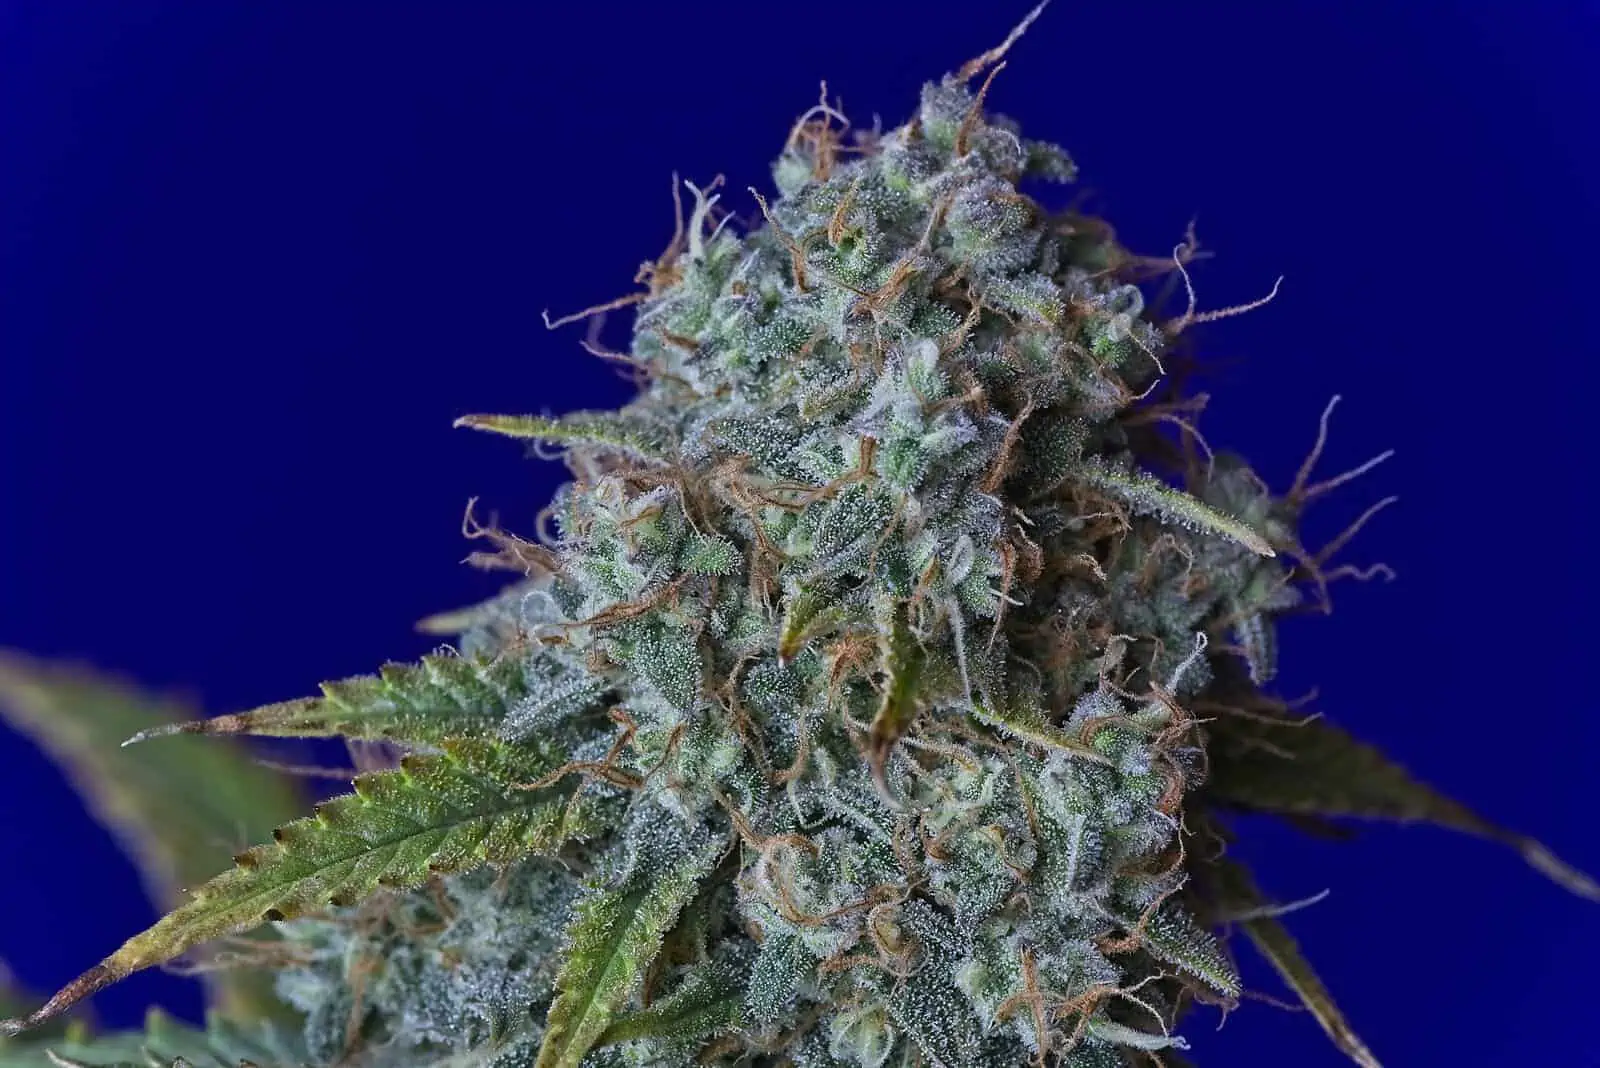 Blue Marijuana Strains: What You Need to Know About Blueberry Hybrids